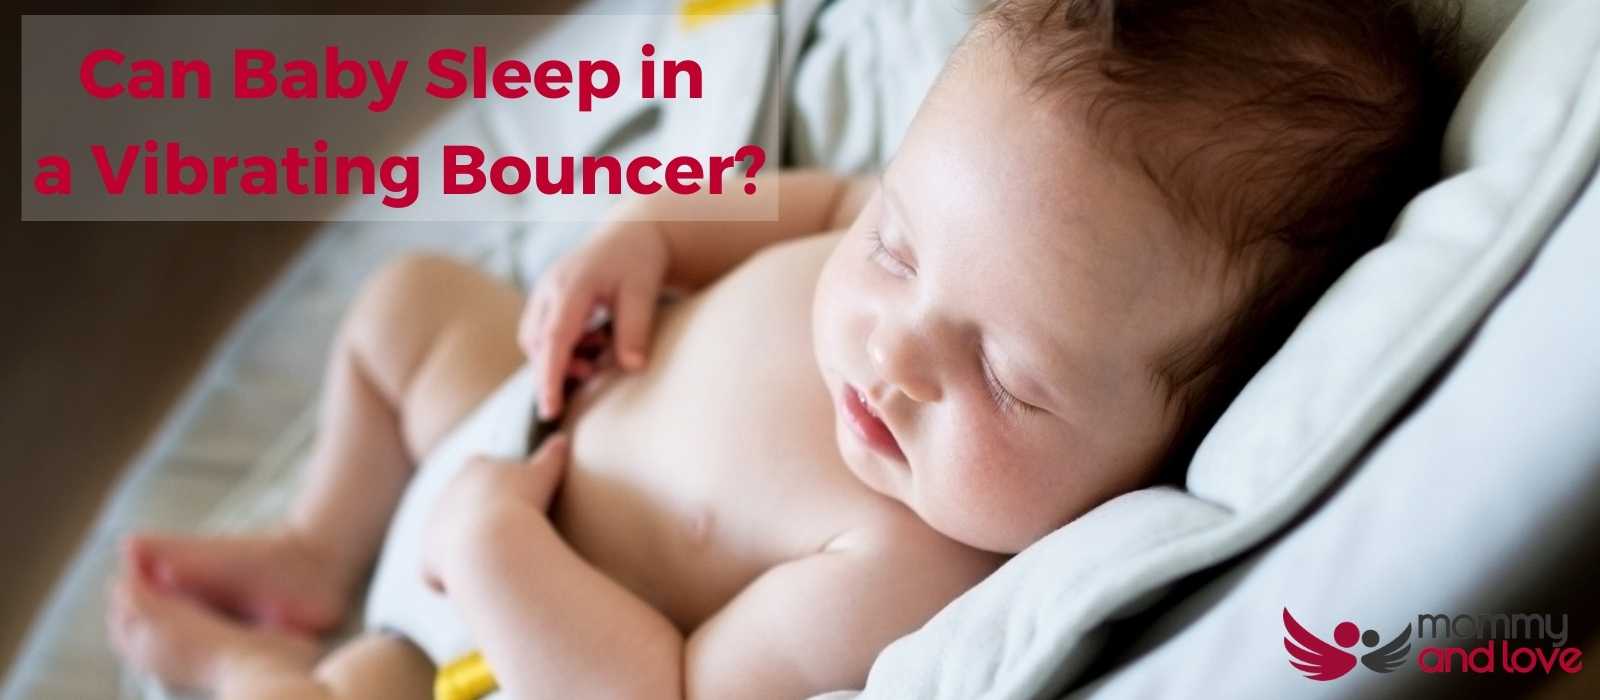 Can Baby Sleep in a Vibrating Bouncer